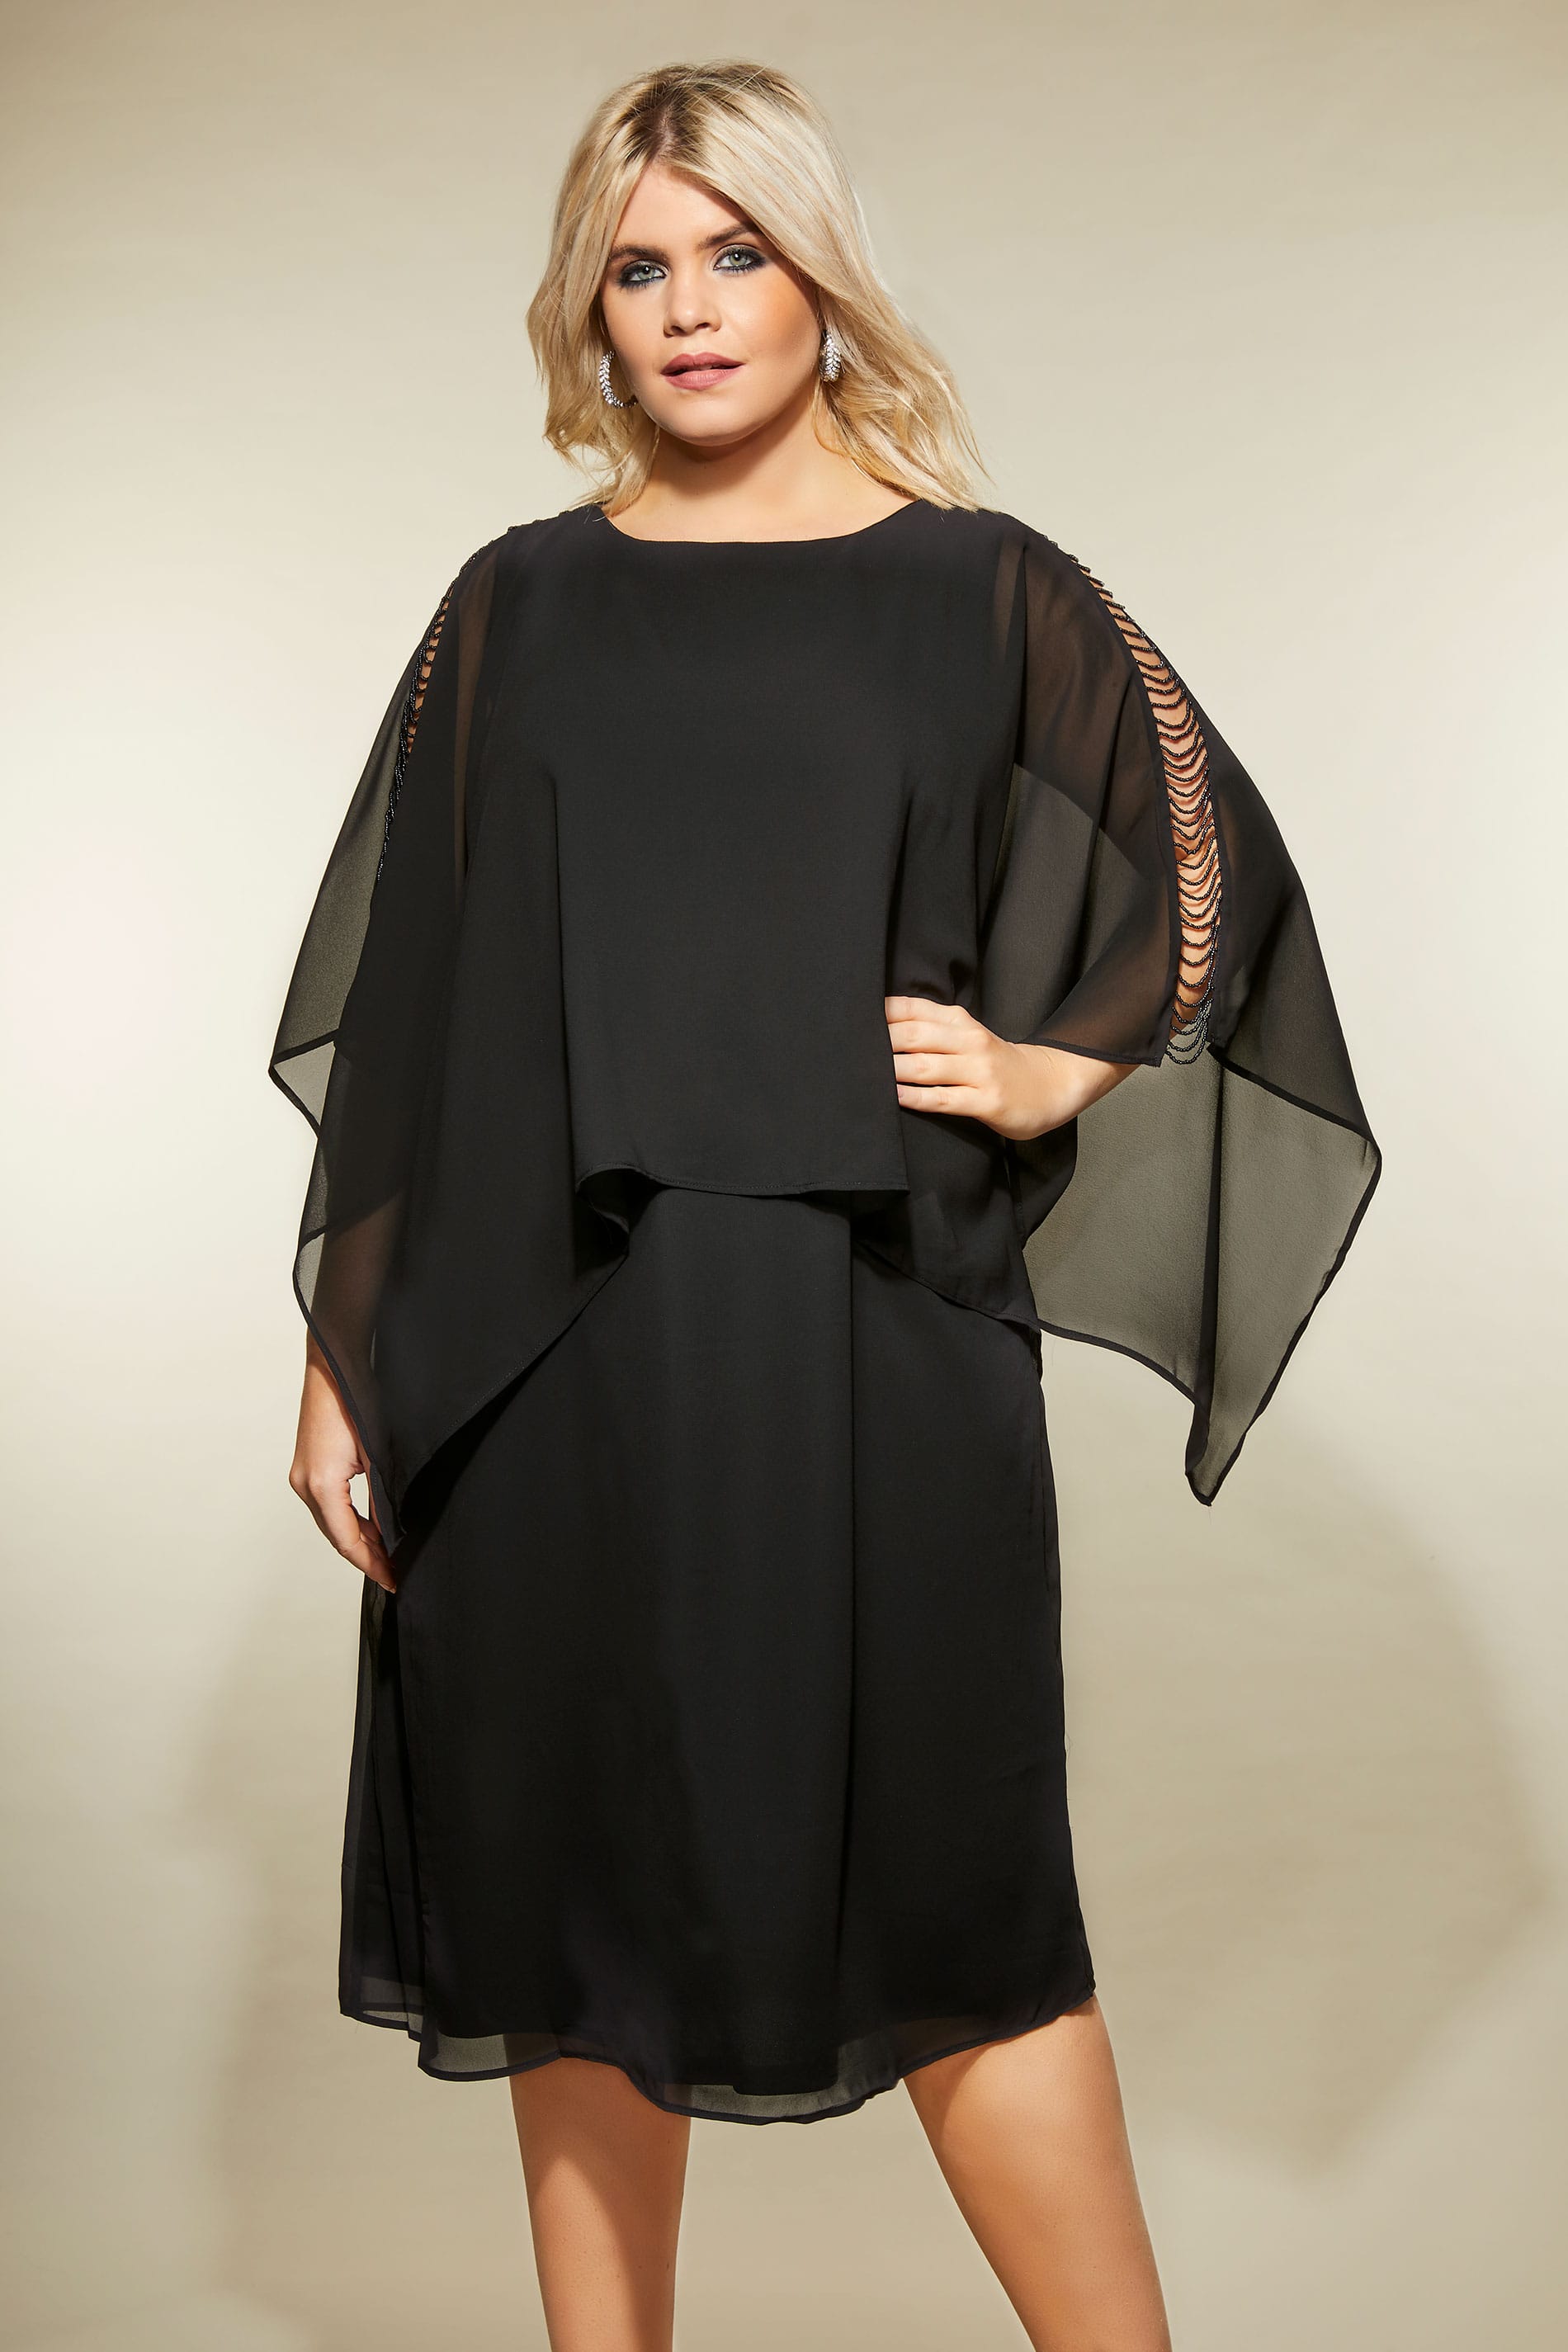 YOURS LONDON Black Embellished Cape Dress, plus size 16 to 32 | Yours ...